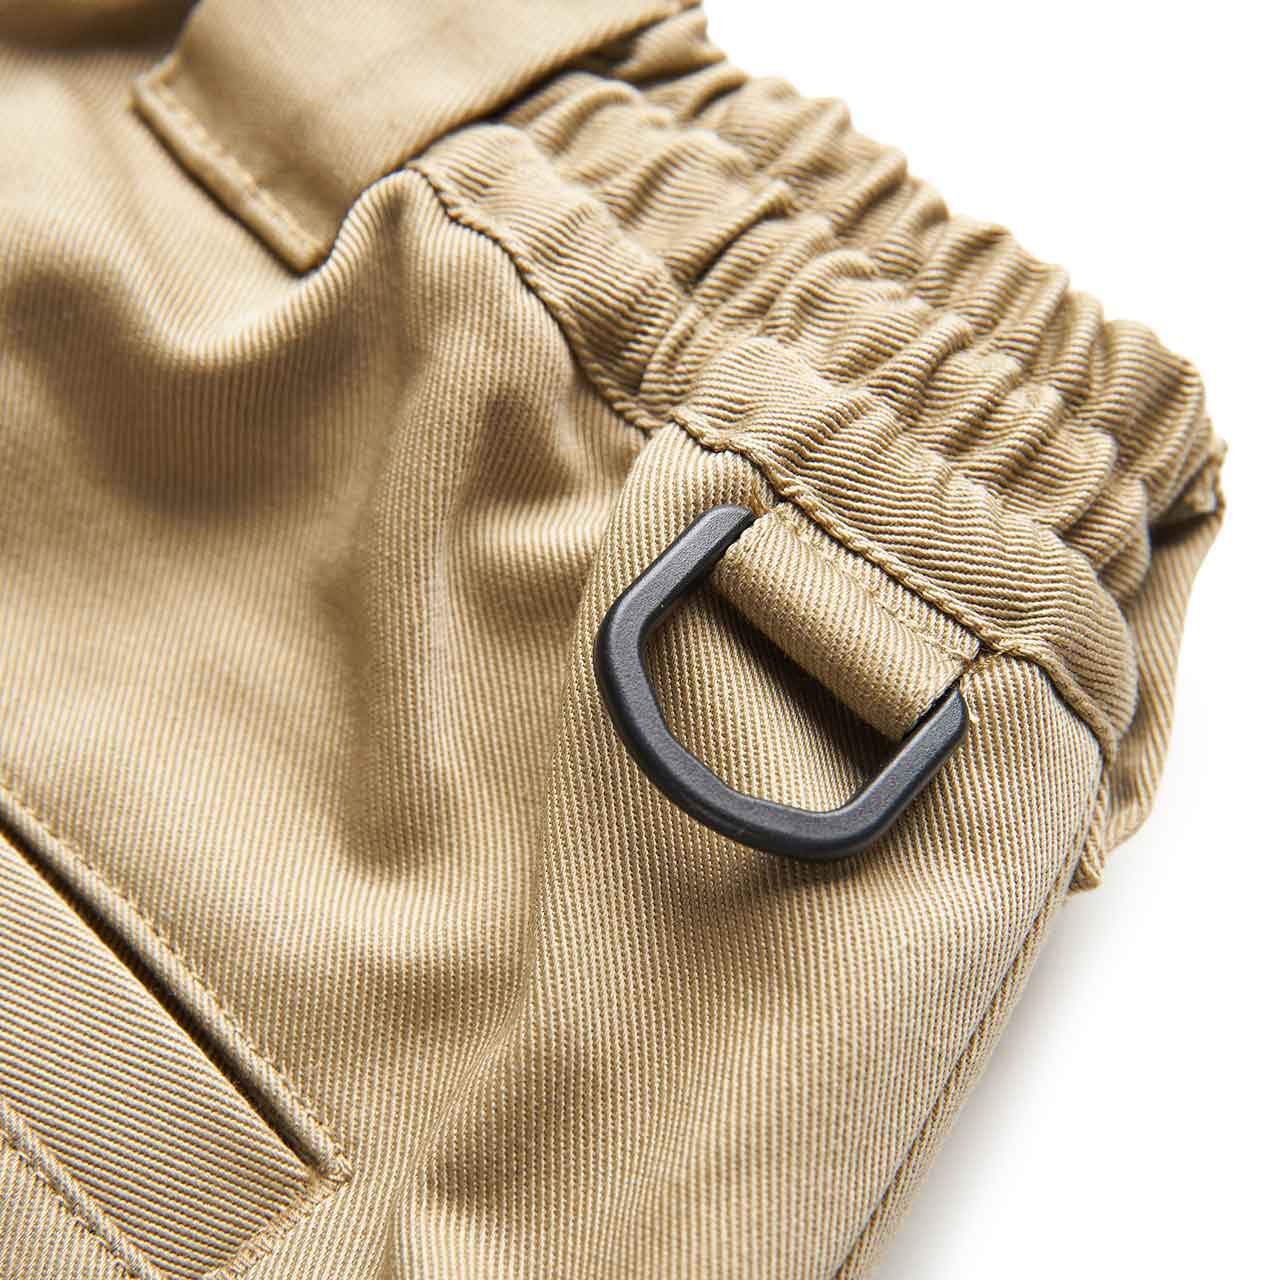 magic stick x dickies 90s style wide tapered chino (tonal beige) - 20hl-msdk-002 - a.plus - Image - 7